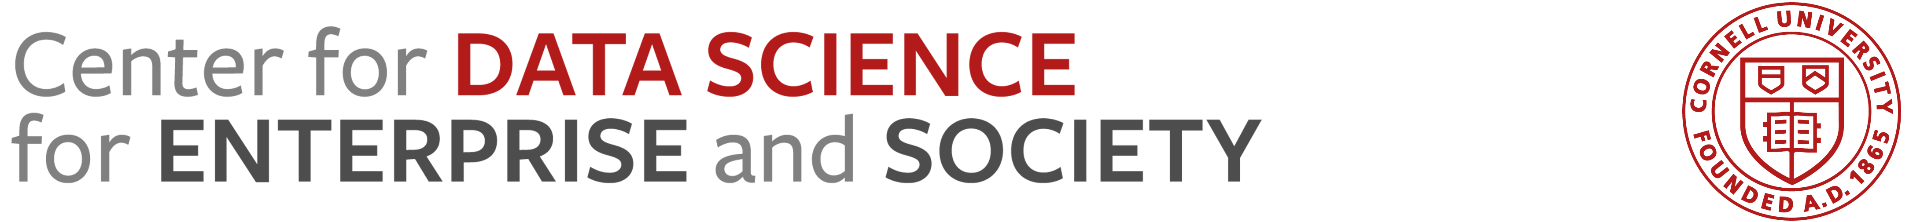 Center for Data Science for Enterprise and Society